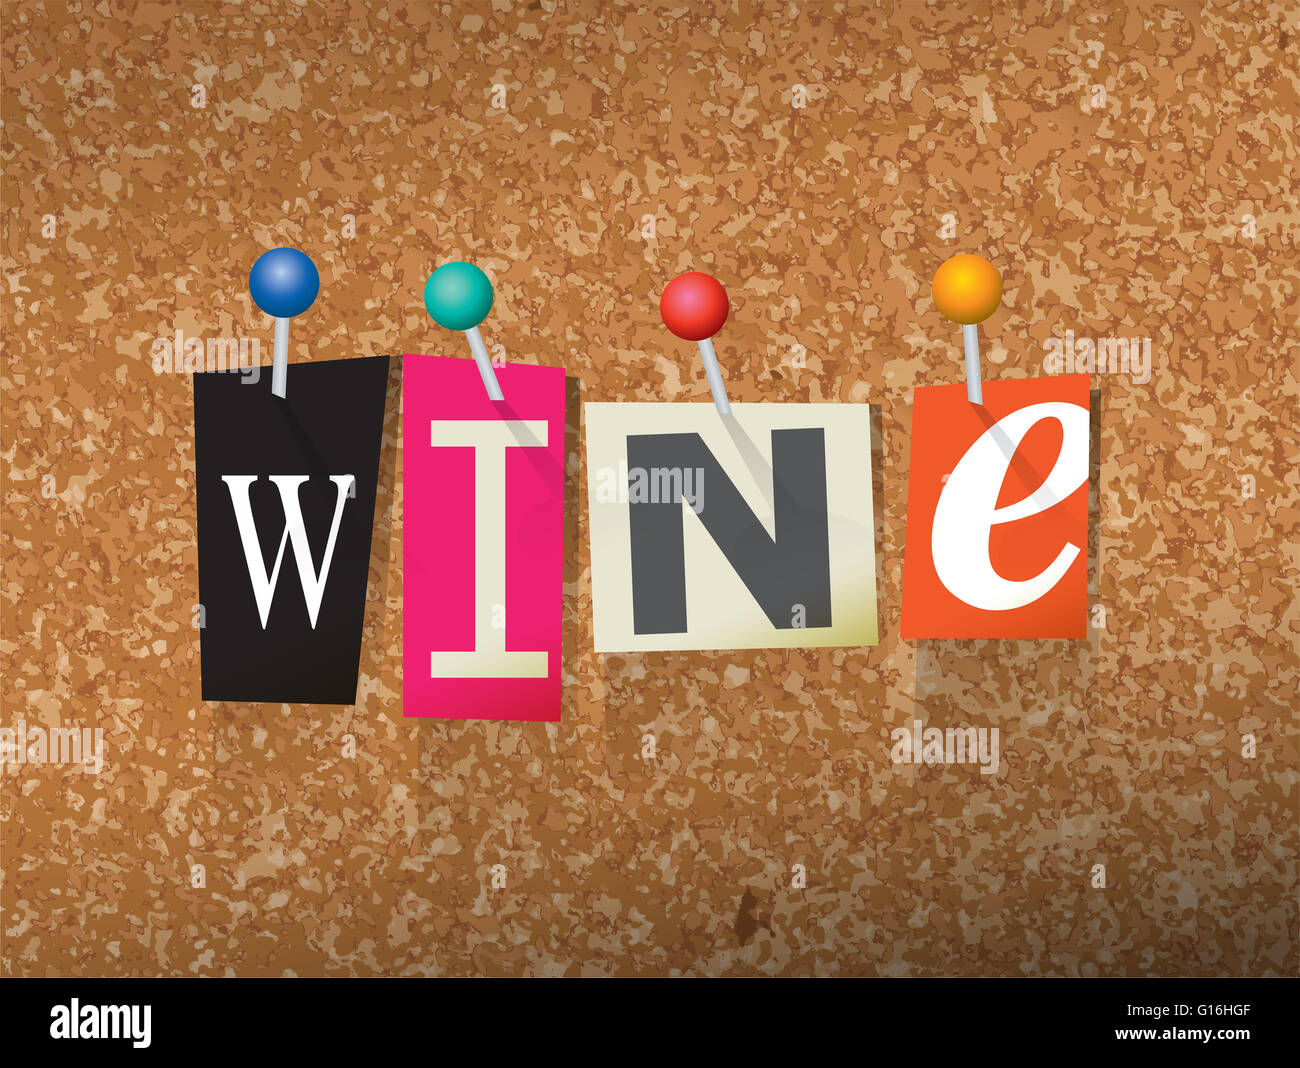 The word 'WINE' written in cut ransom note style paper letters and pinned to a cork bulletin board. Stock Photo